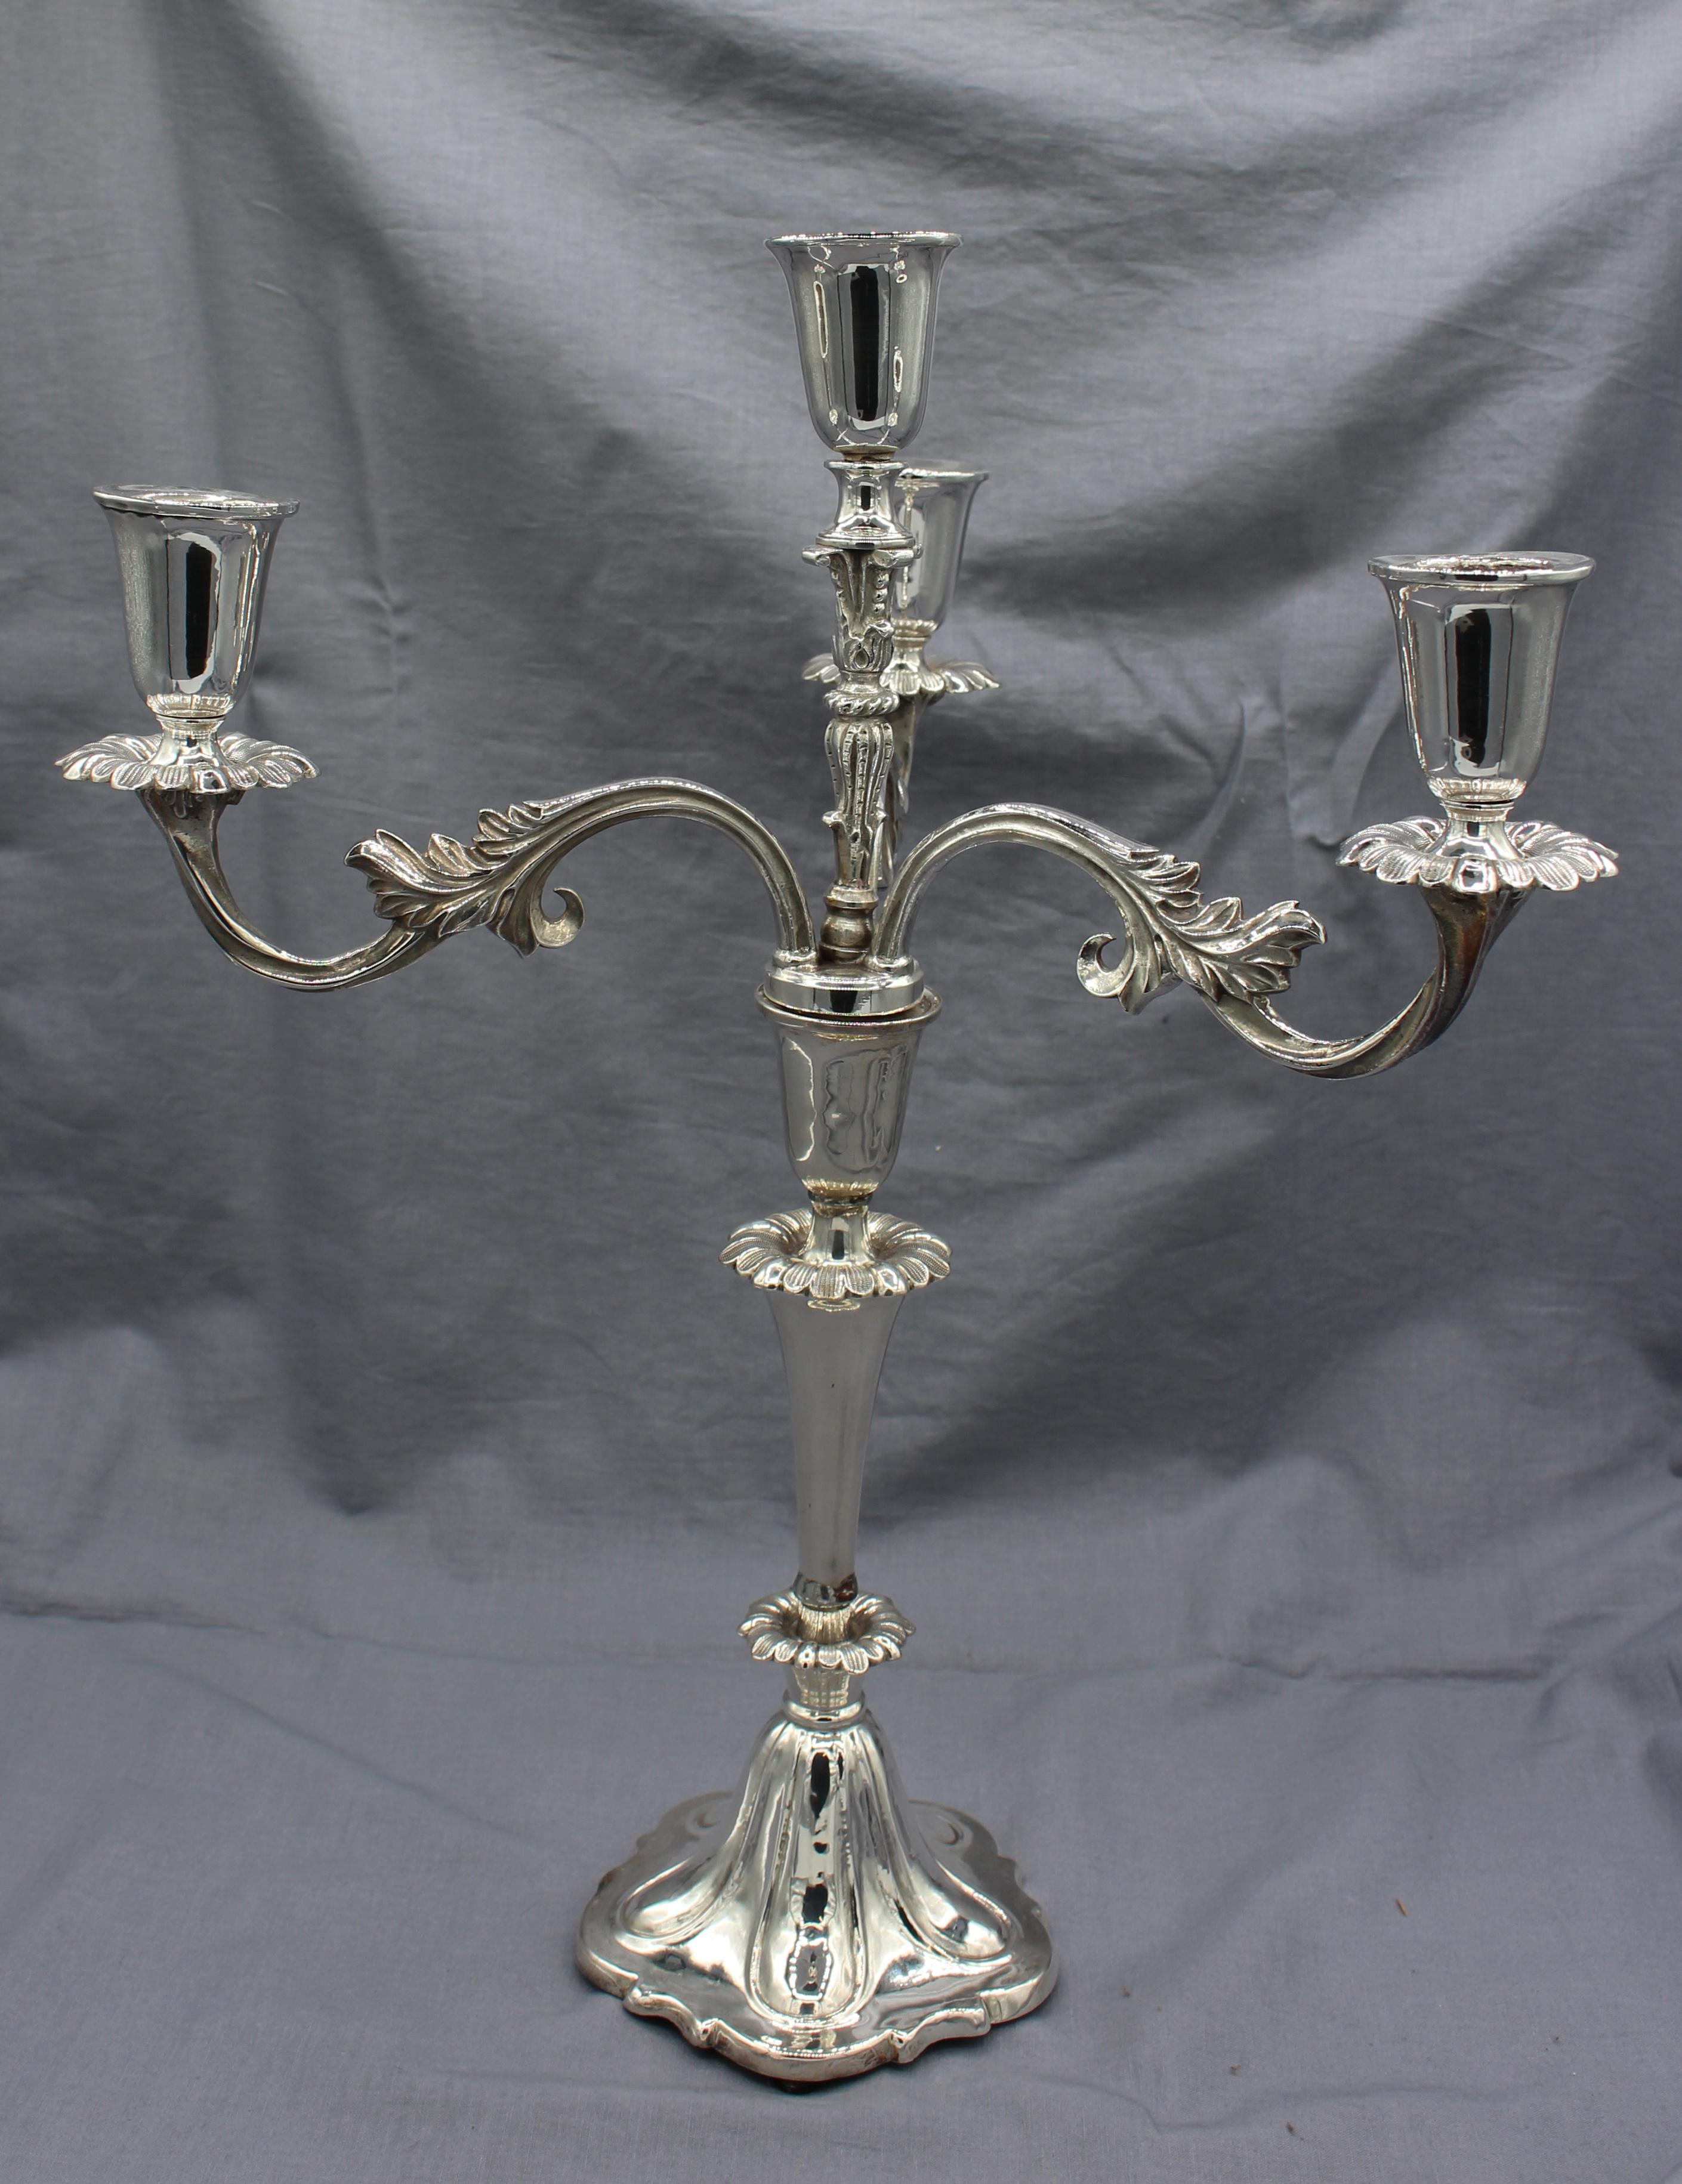 A pair of silver plated 4-light candelabras, late 19th century, Continental, German & Swiss history. Lobed petal form bases rising through leaves into rococo style arms. One shaft repaired above first ring of leaves. Well weighted.
15 1/4